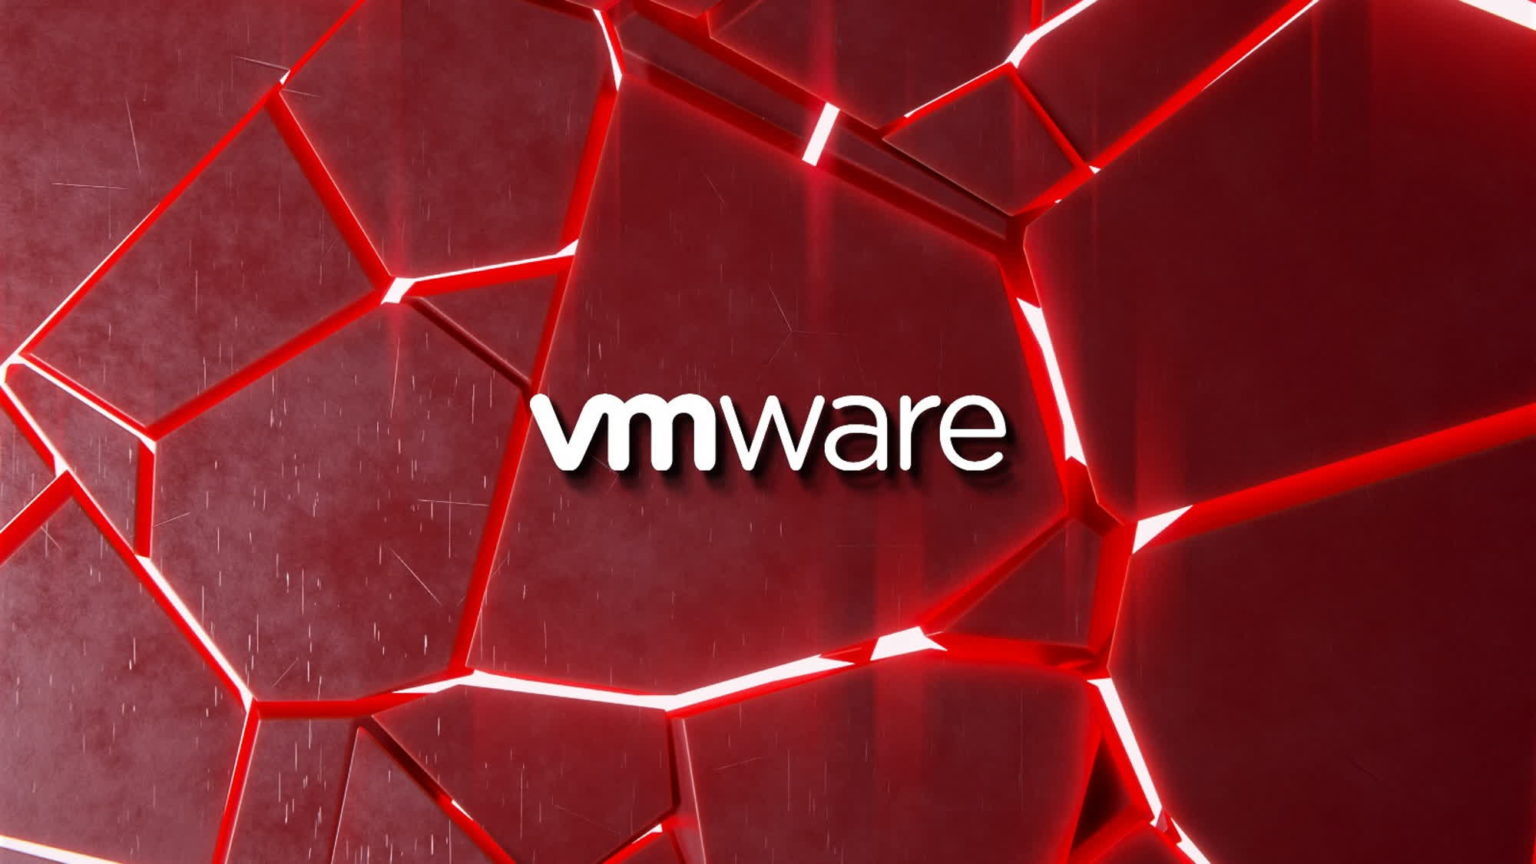 VMware forced to patch dangerous vulnerabilities in discontinued products